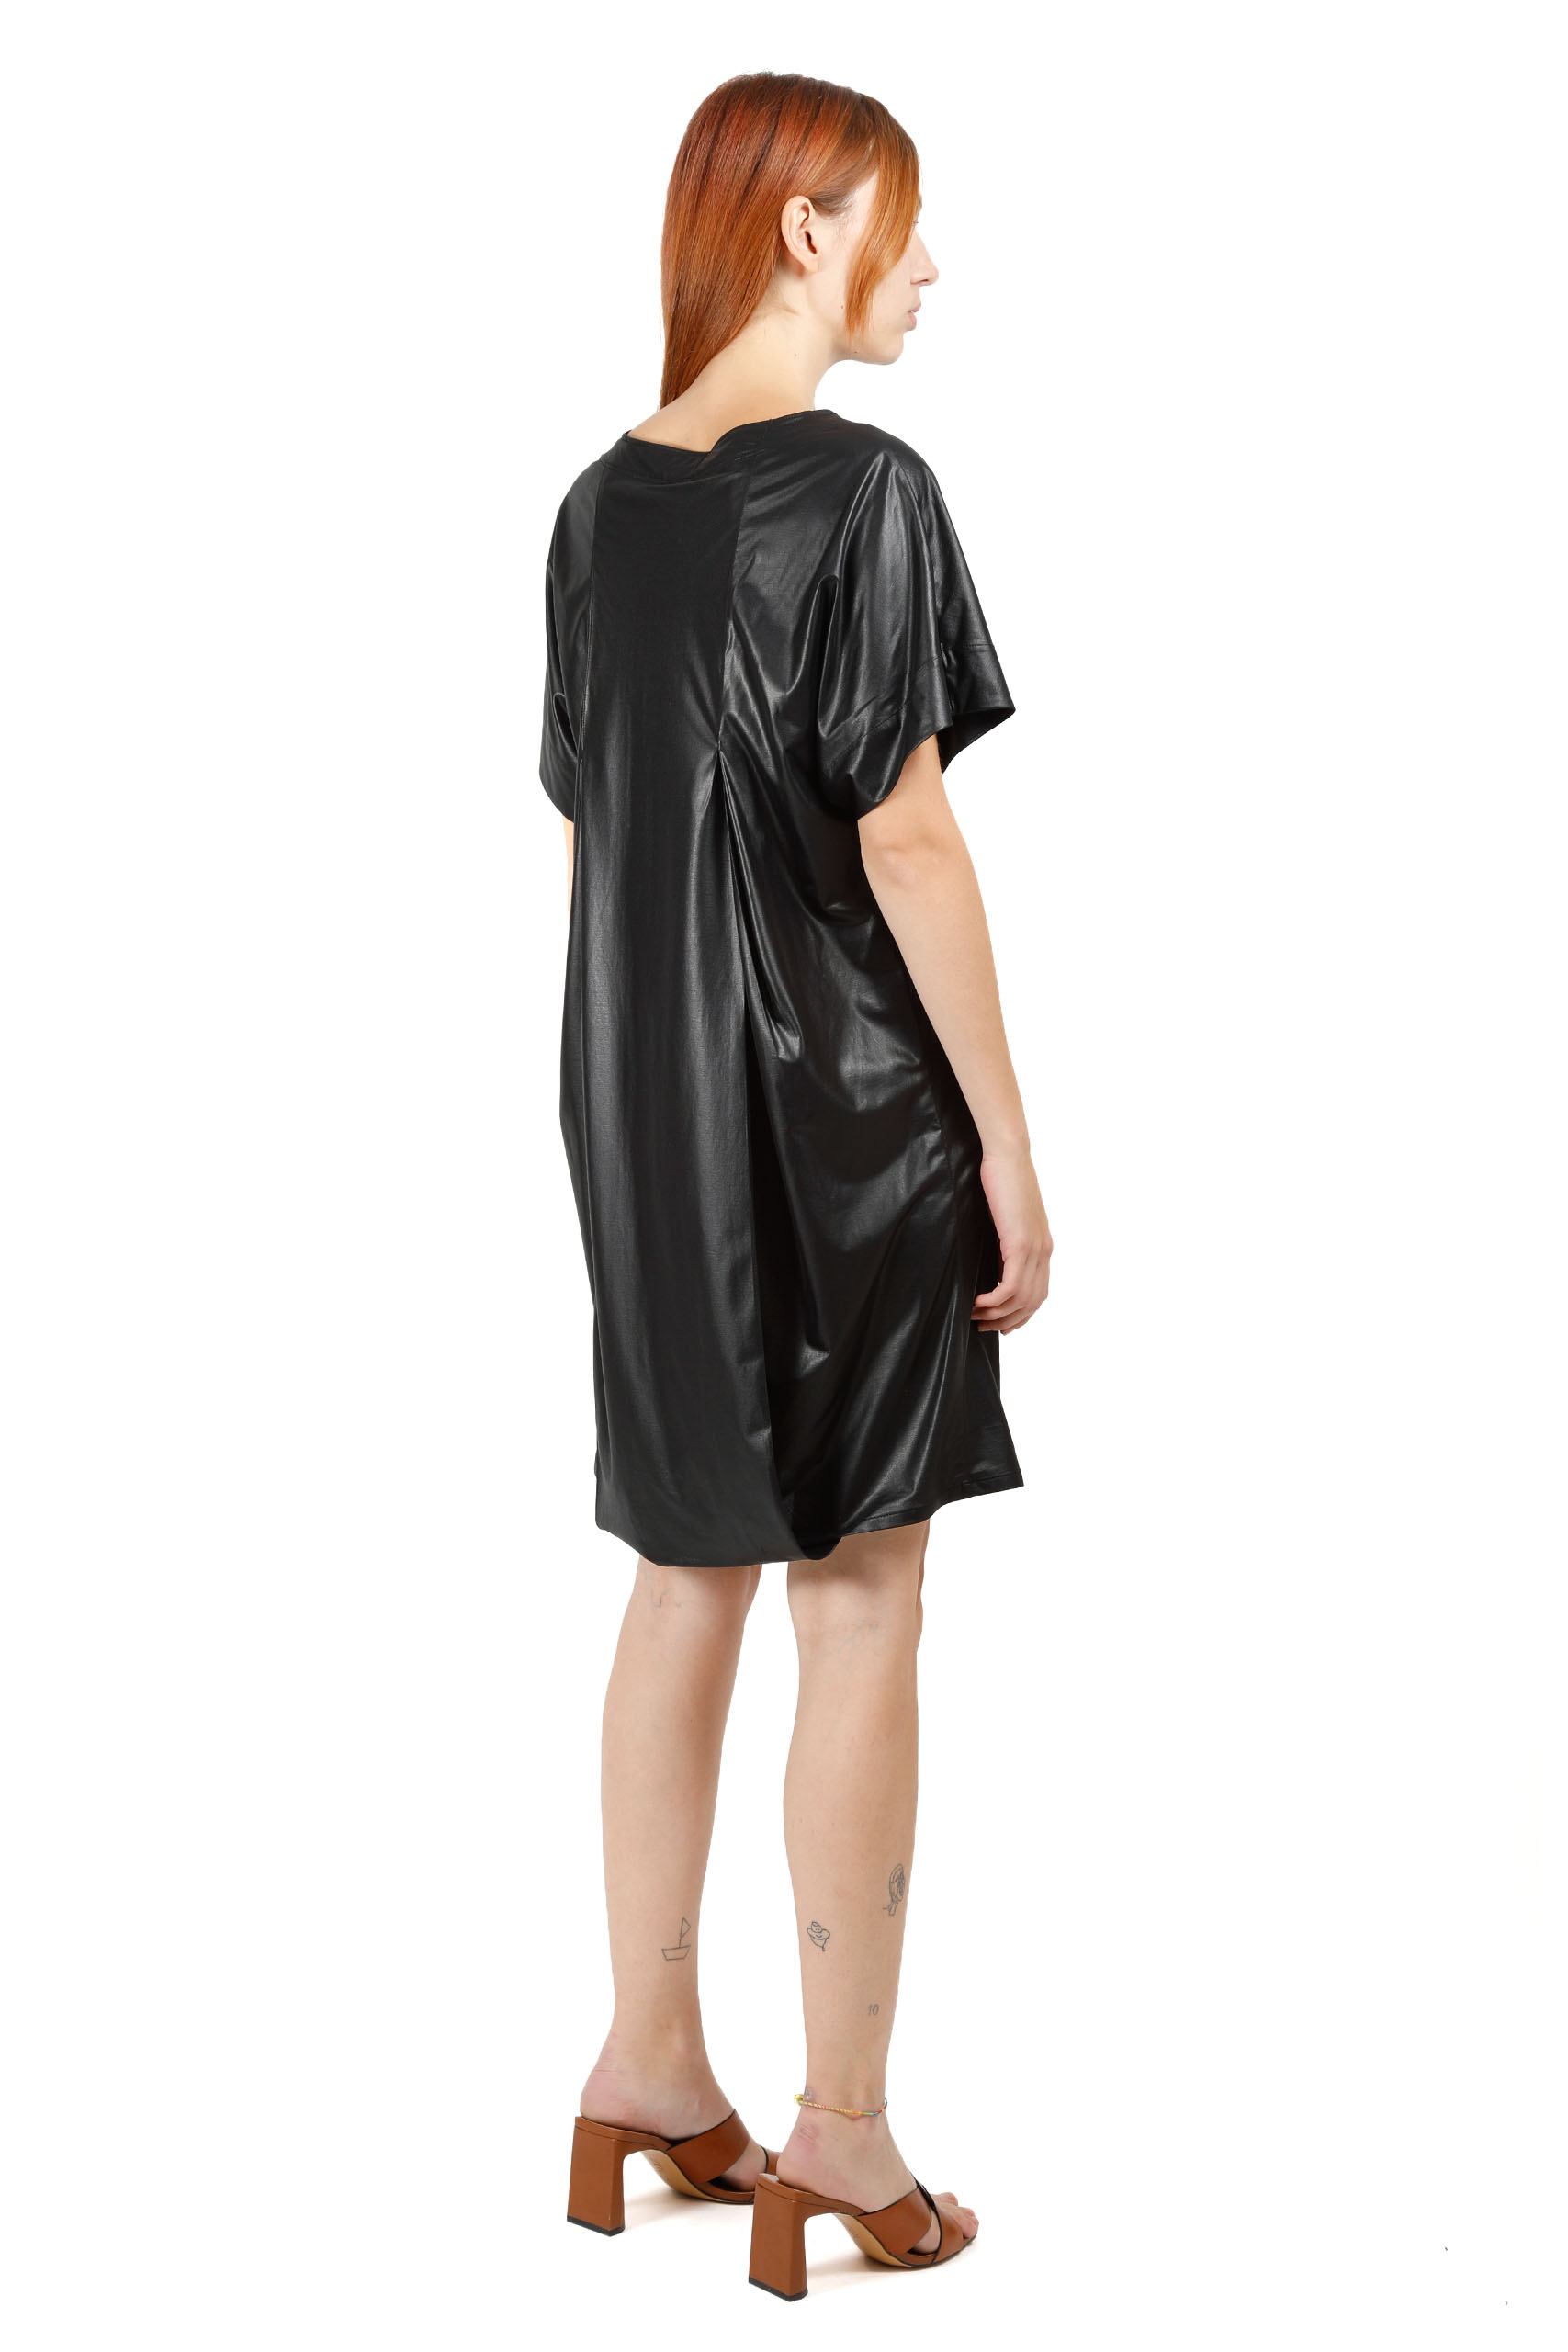 ISSEY MIYAKE Coated-jersey dress Early 2000s - Shop the Story